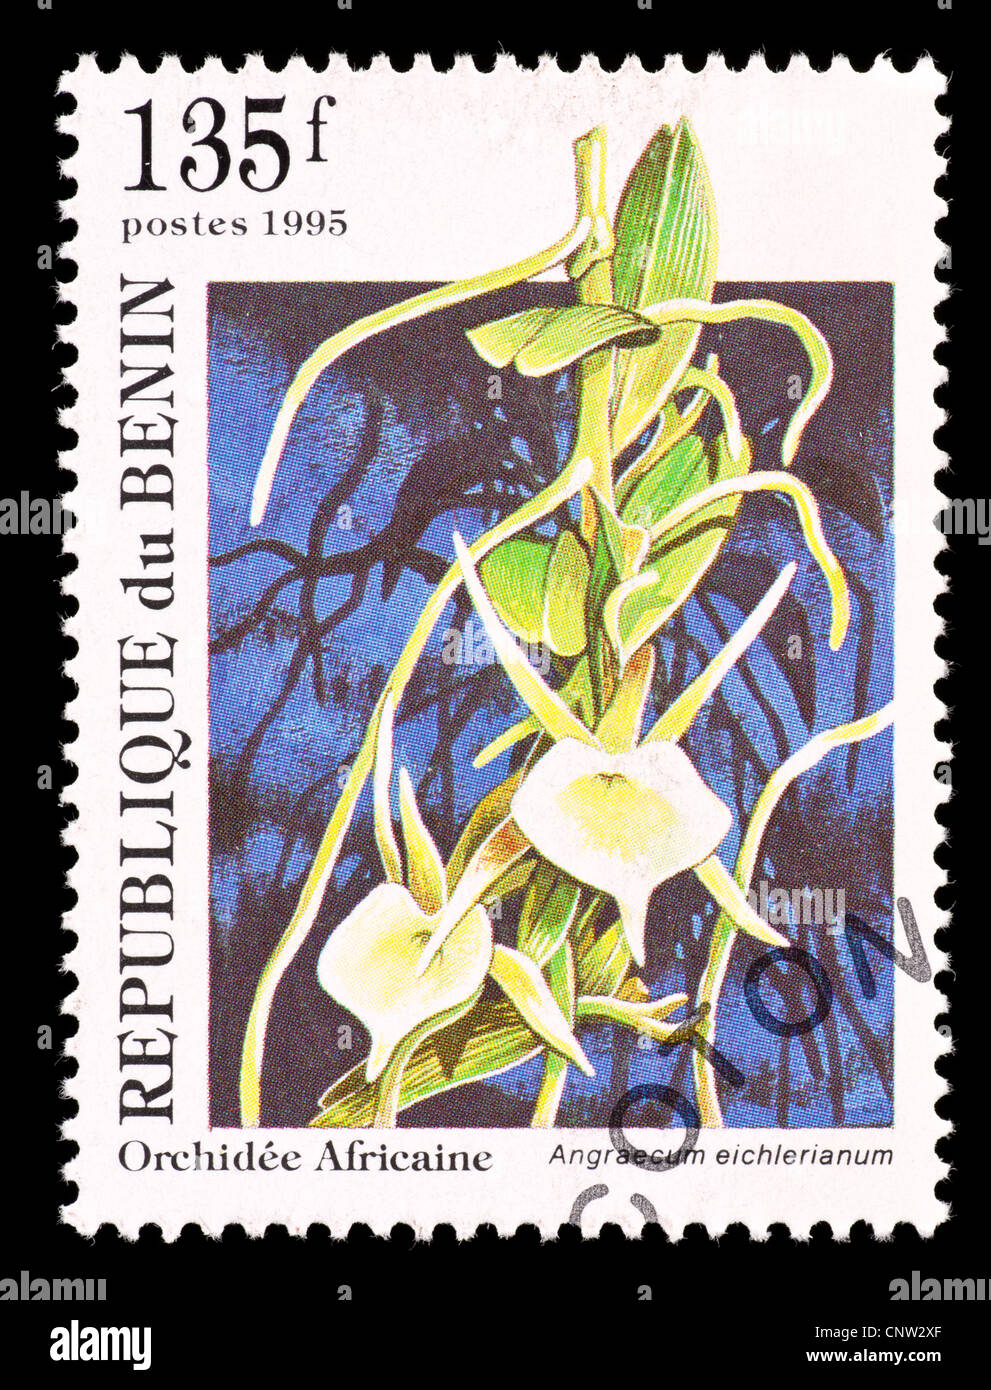 Postage stamp from Benin depicting a African orchid (Angreacum eichlerianum) Stock Photo